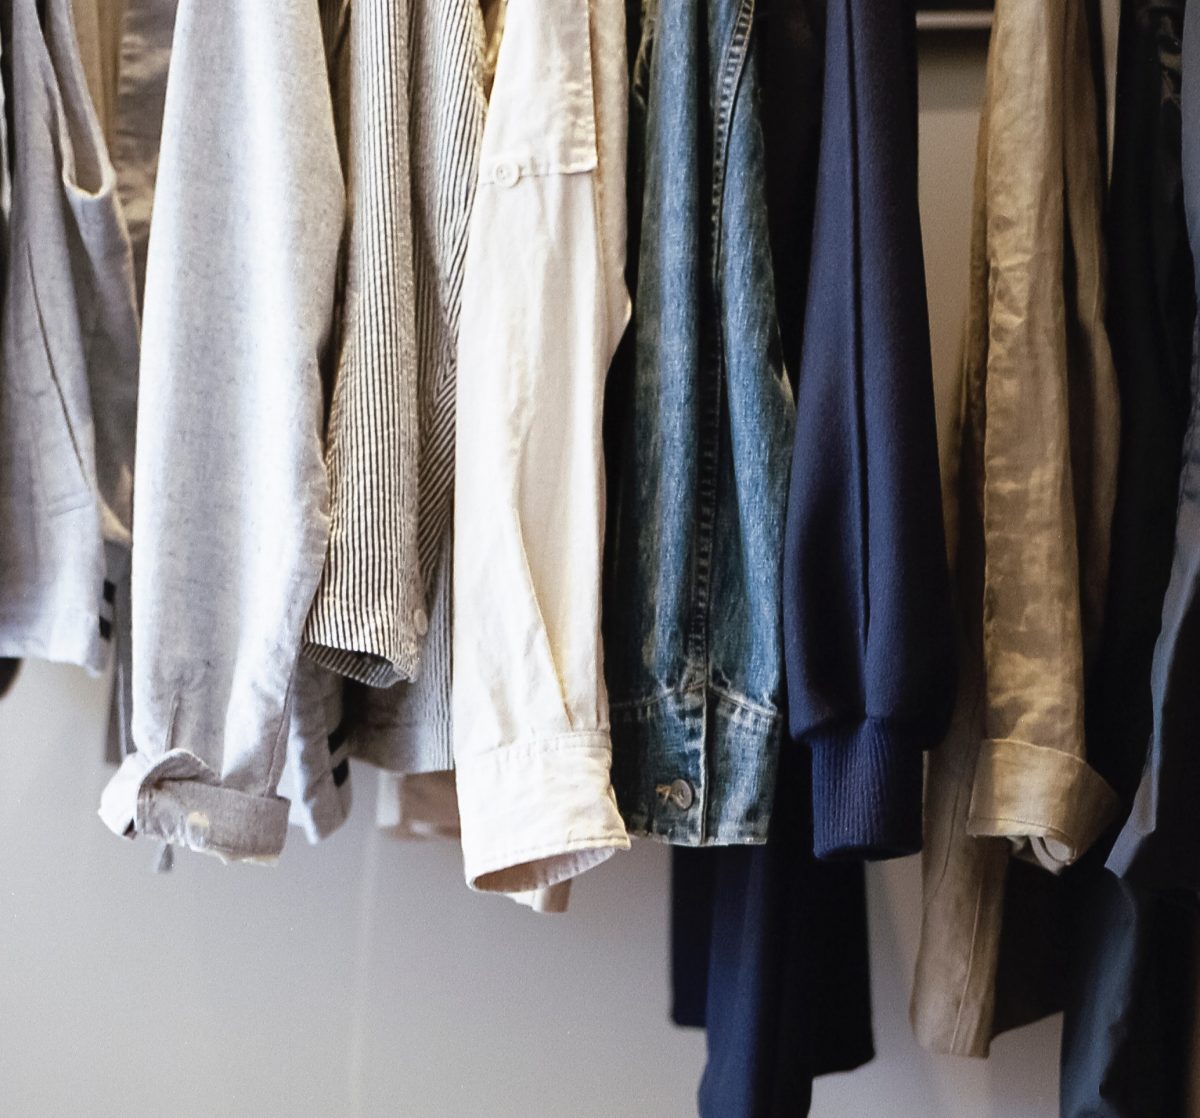 close up of sleeves of shirts hanging on a rack